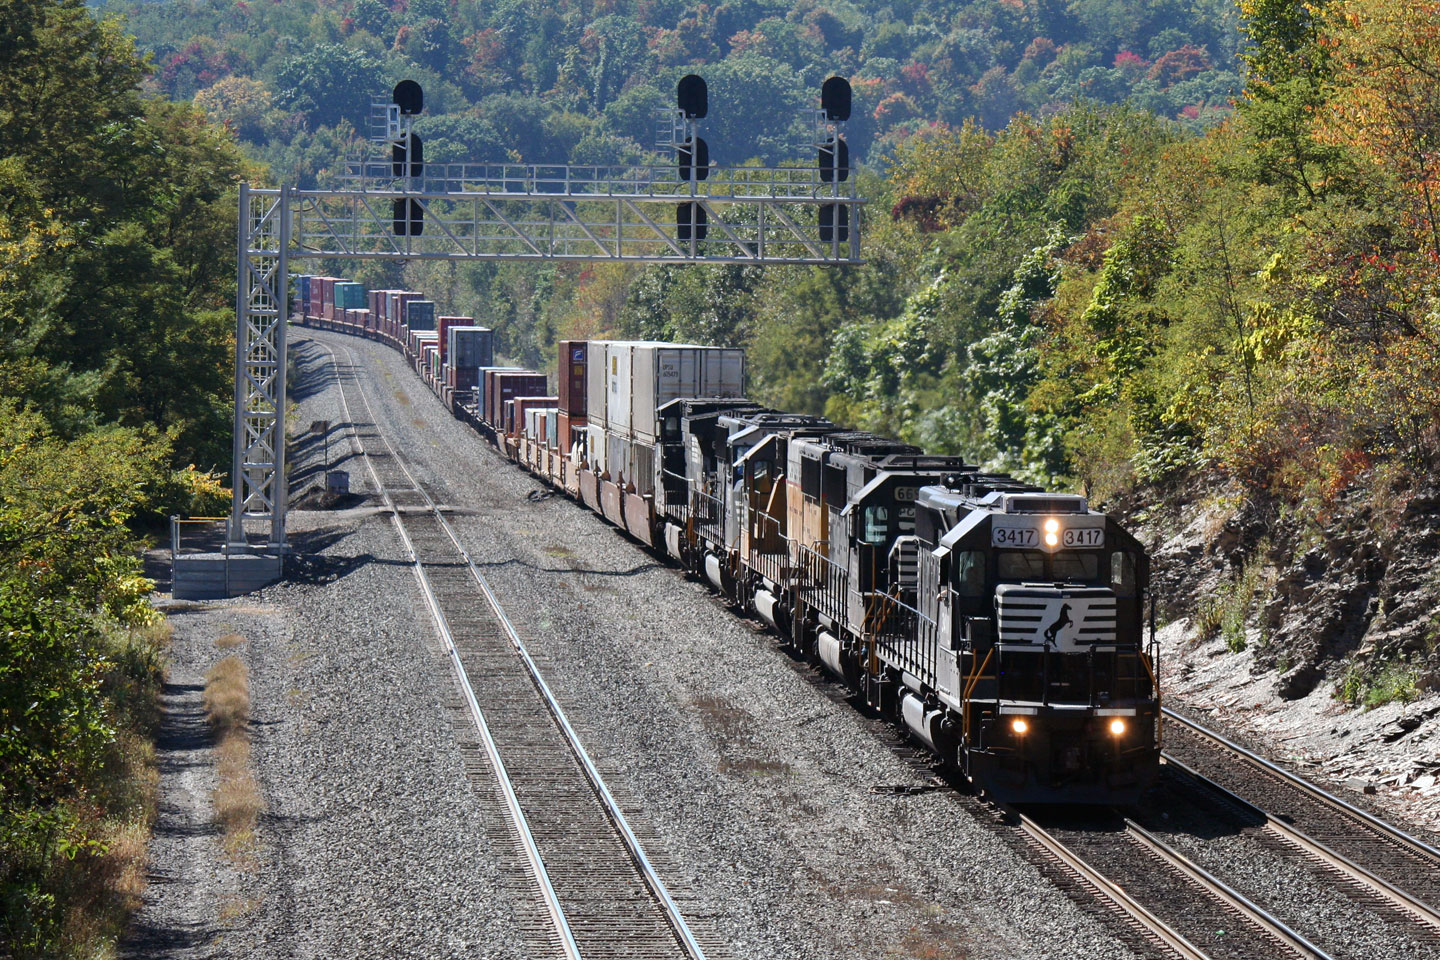 It was a day of SD40-2 leaders, with this stack train coming down off the mountain lead by the EMD classic and full of a bunch of classic power.